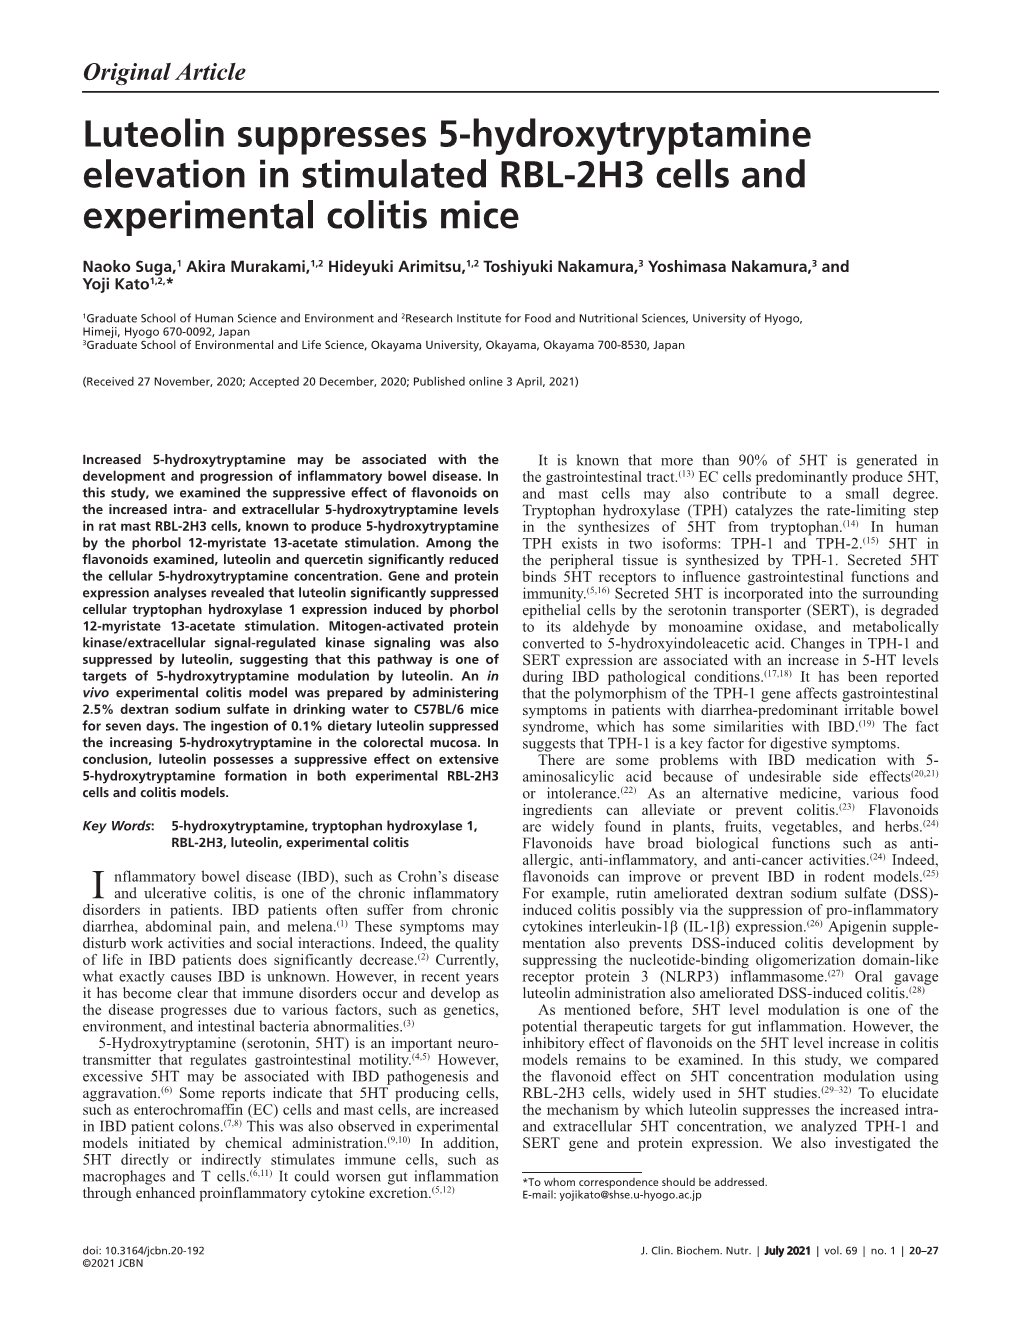 Luteolin Suppresses 5-Hydroxytryptamine Elevation in Stimulated RBL-2H3 Cells and Experimental Colitis Mice